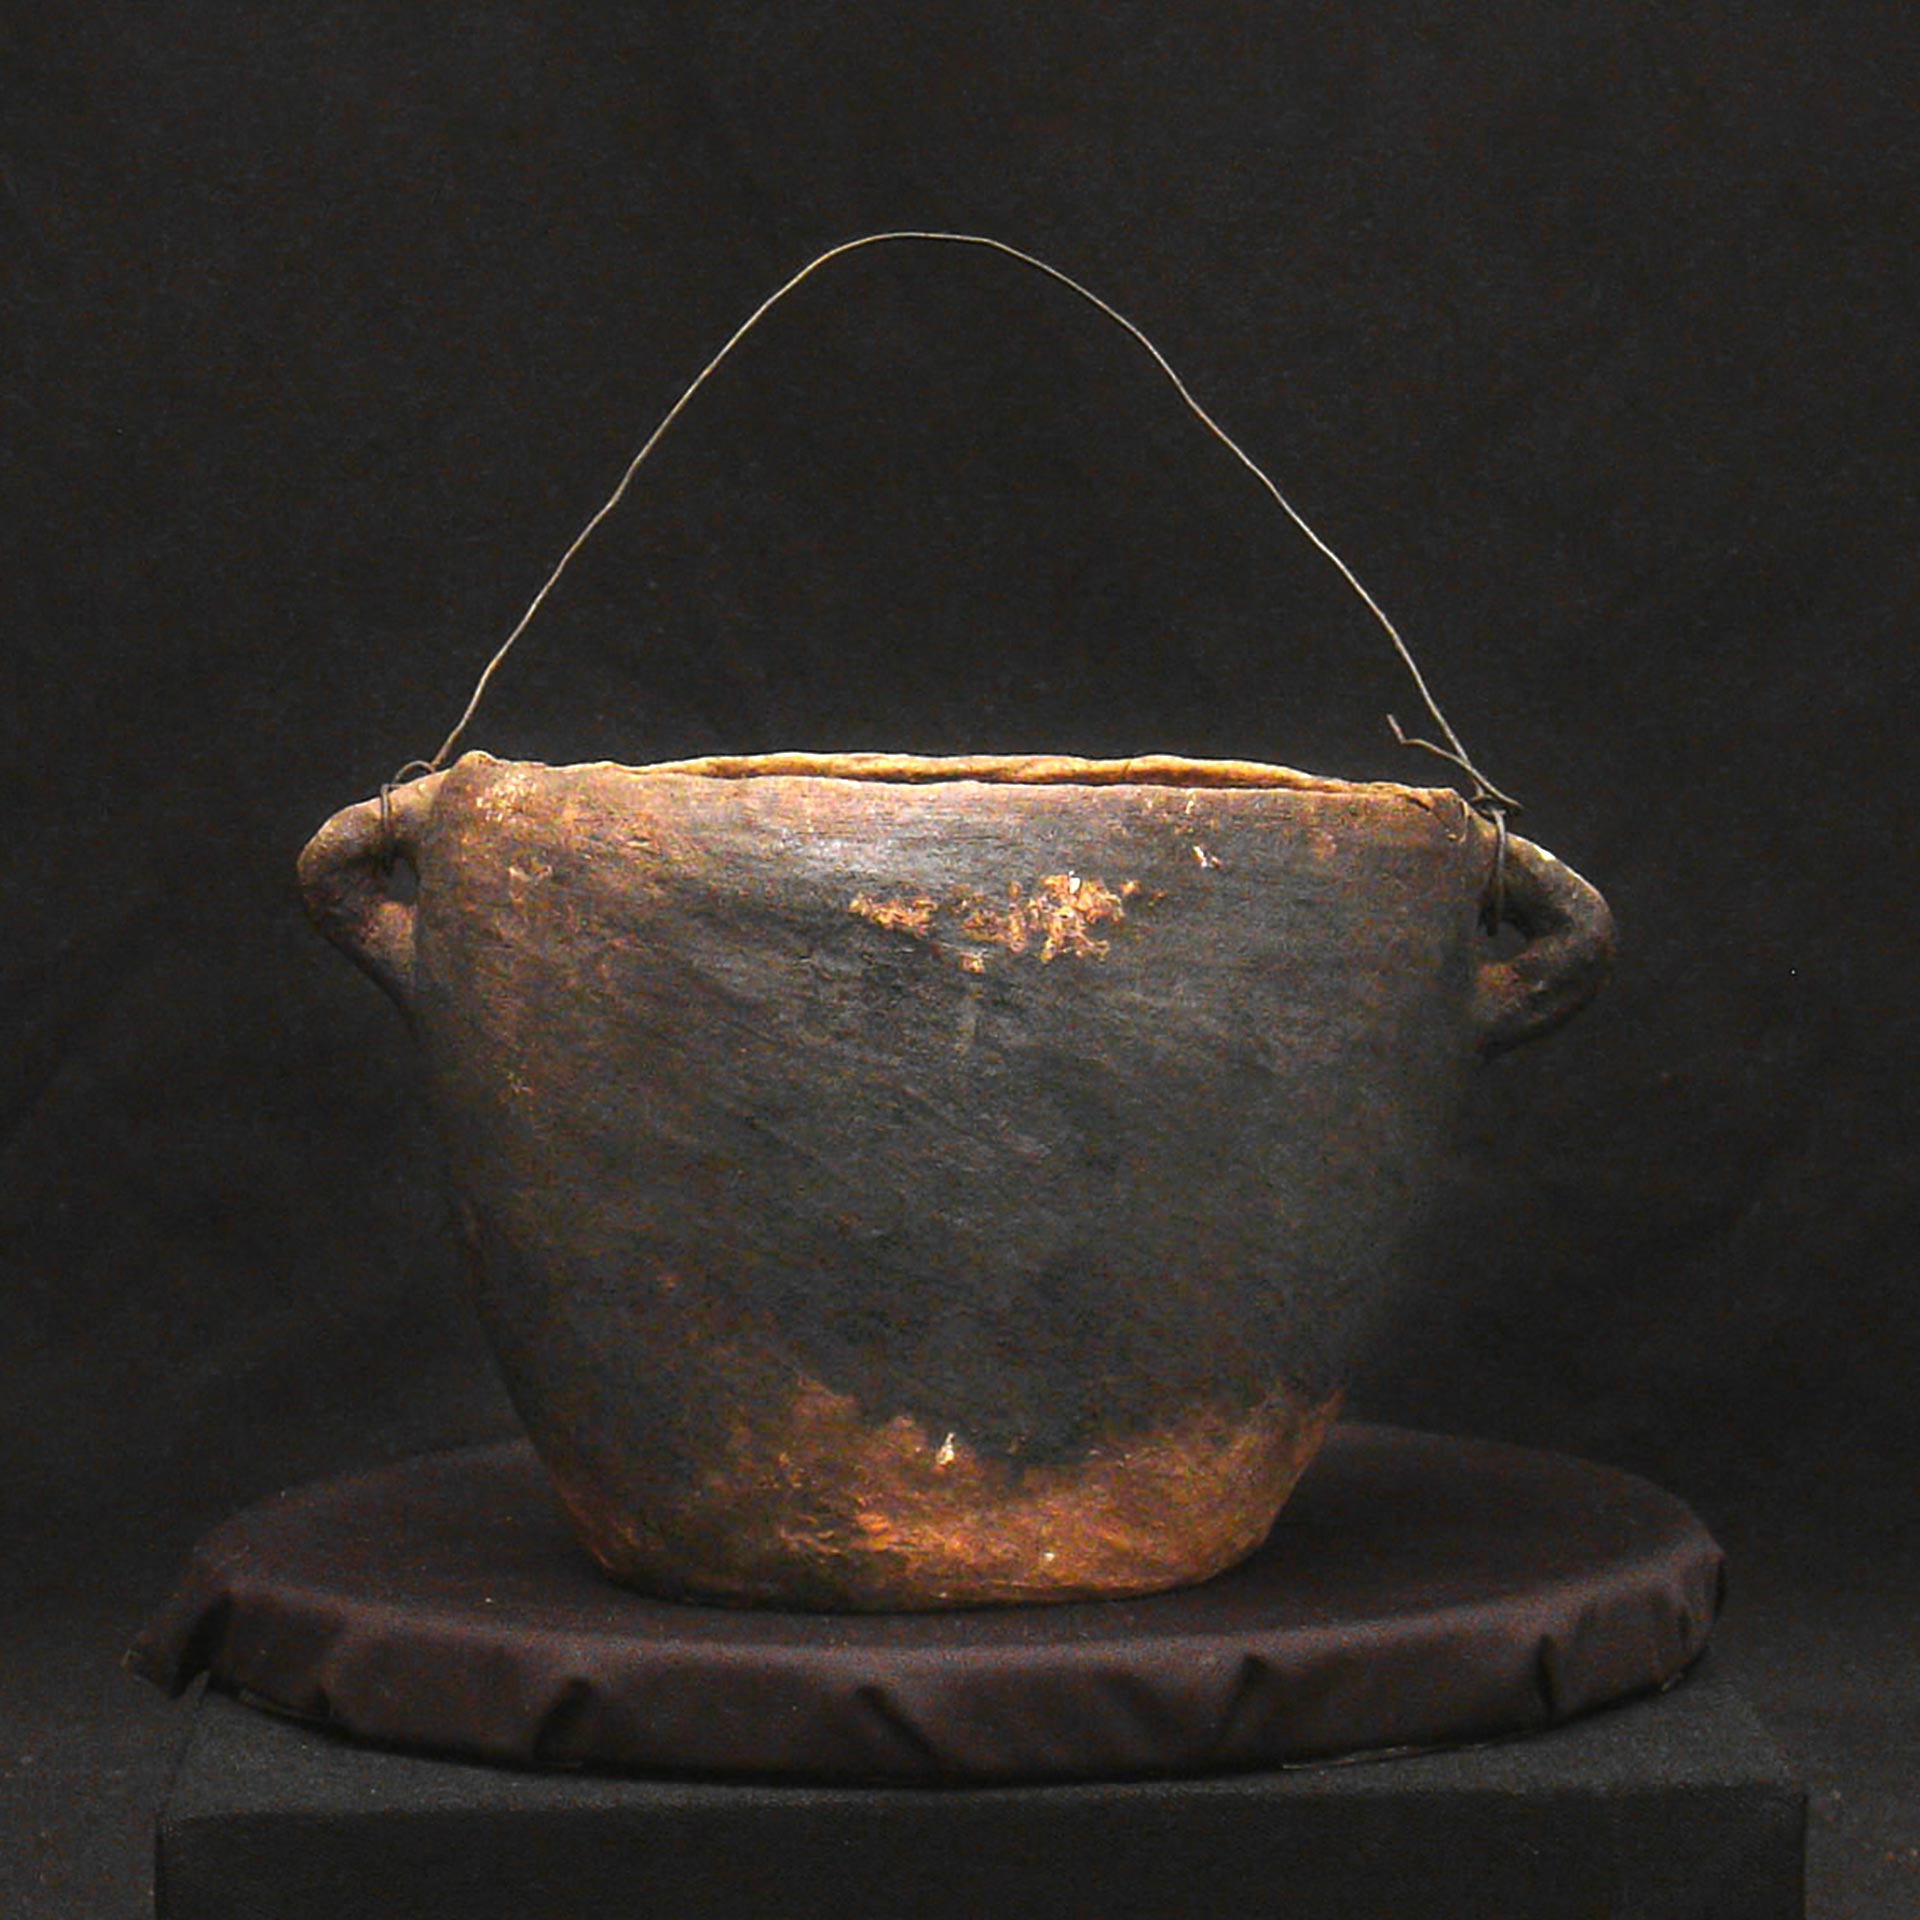 black and brown clay pot with a metal wire handle